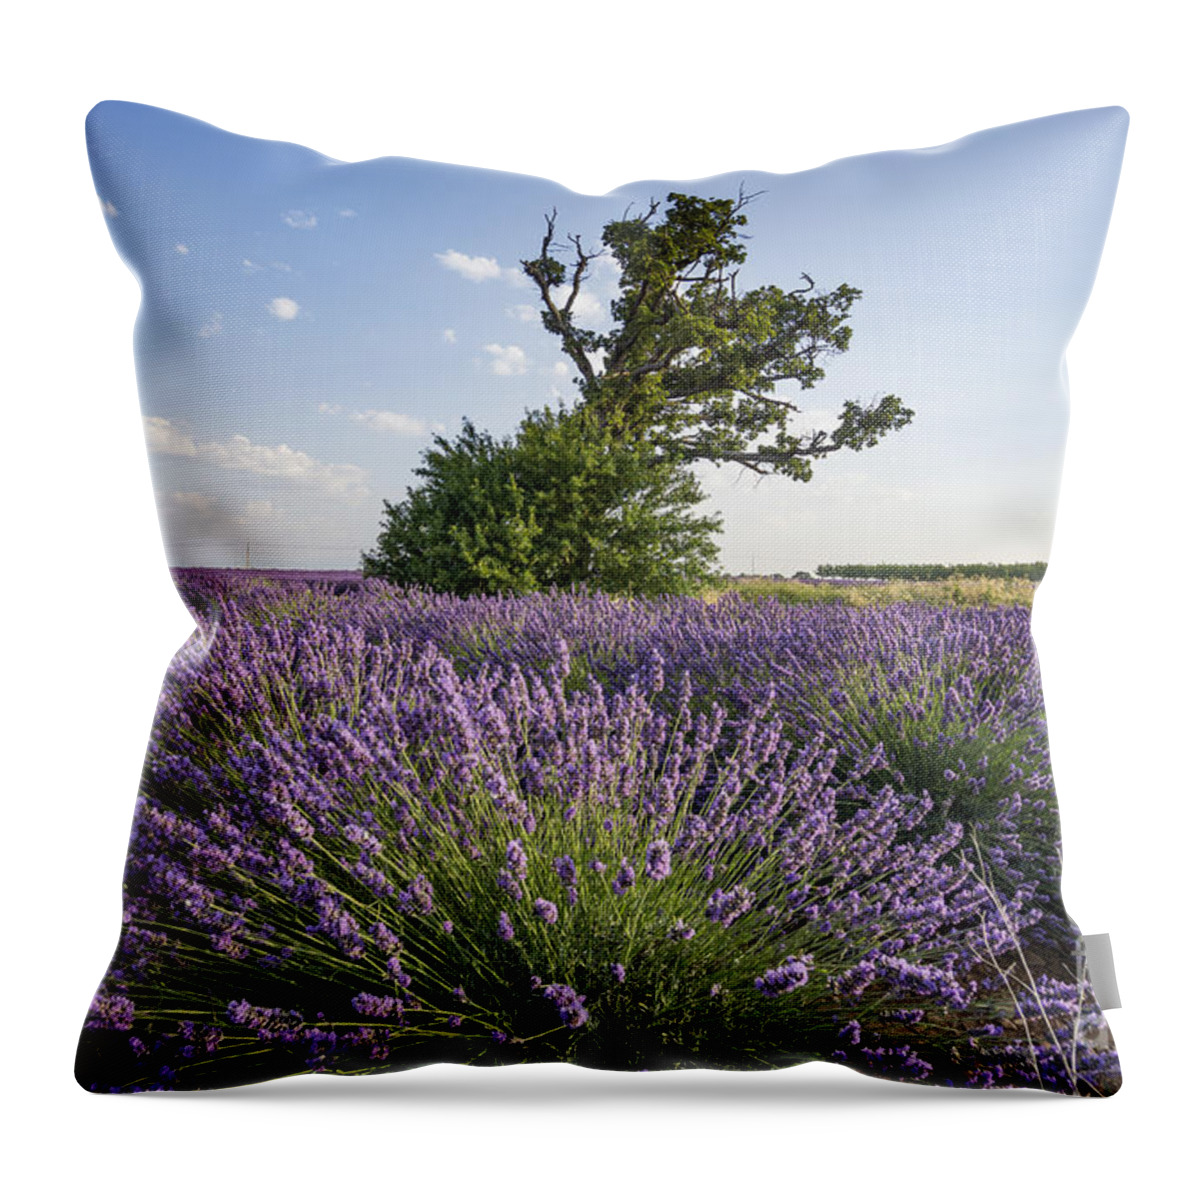 Agrarian Throw Pillow featuring the photograph Lavender Provence by Juergen Held